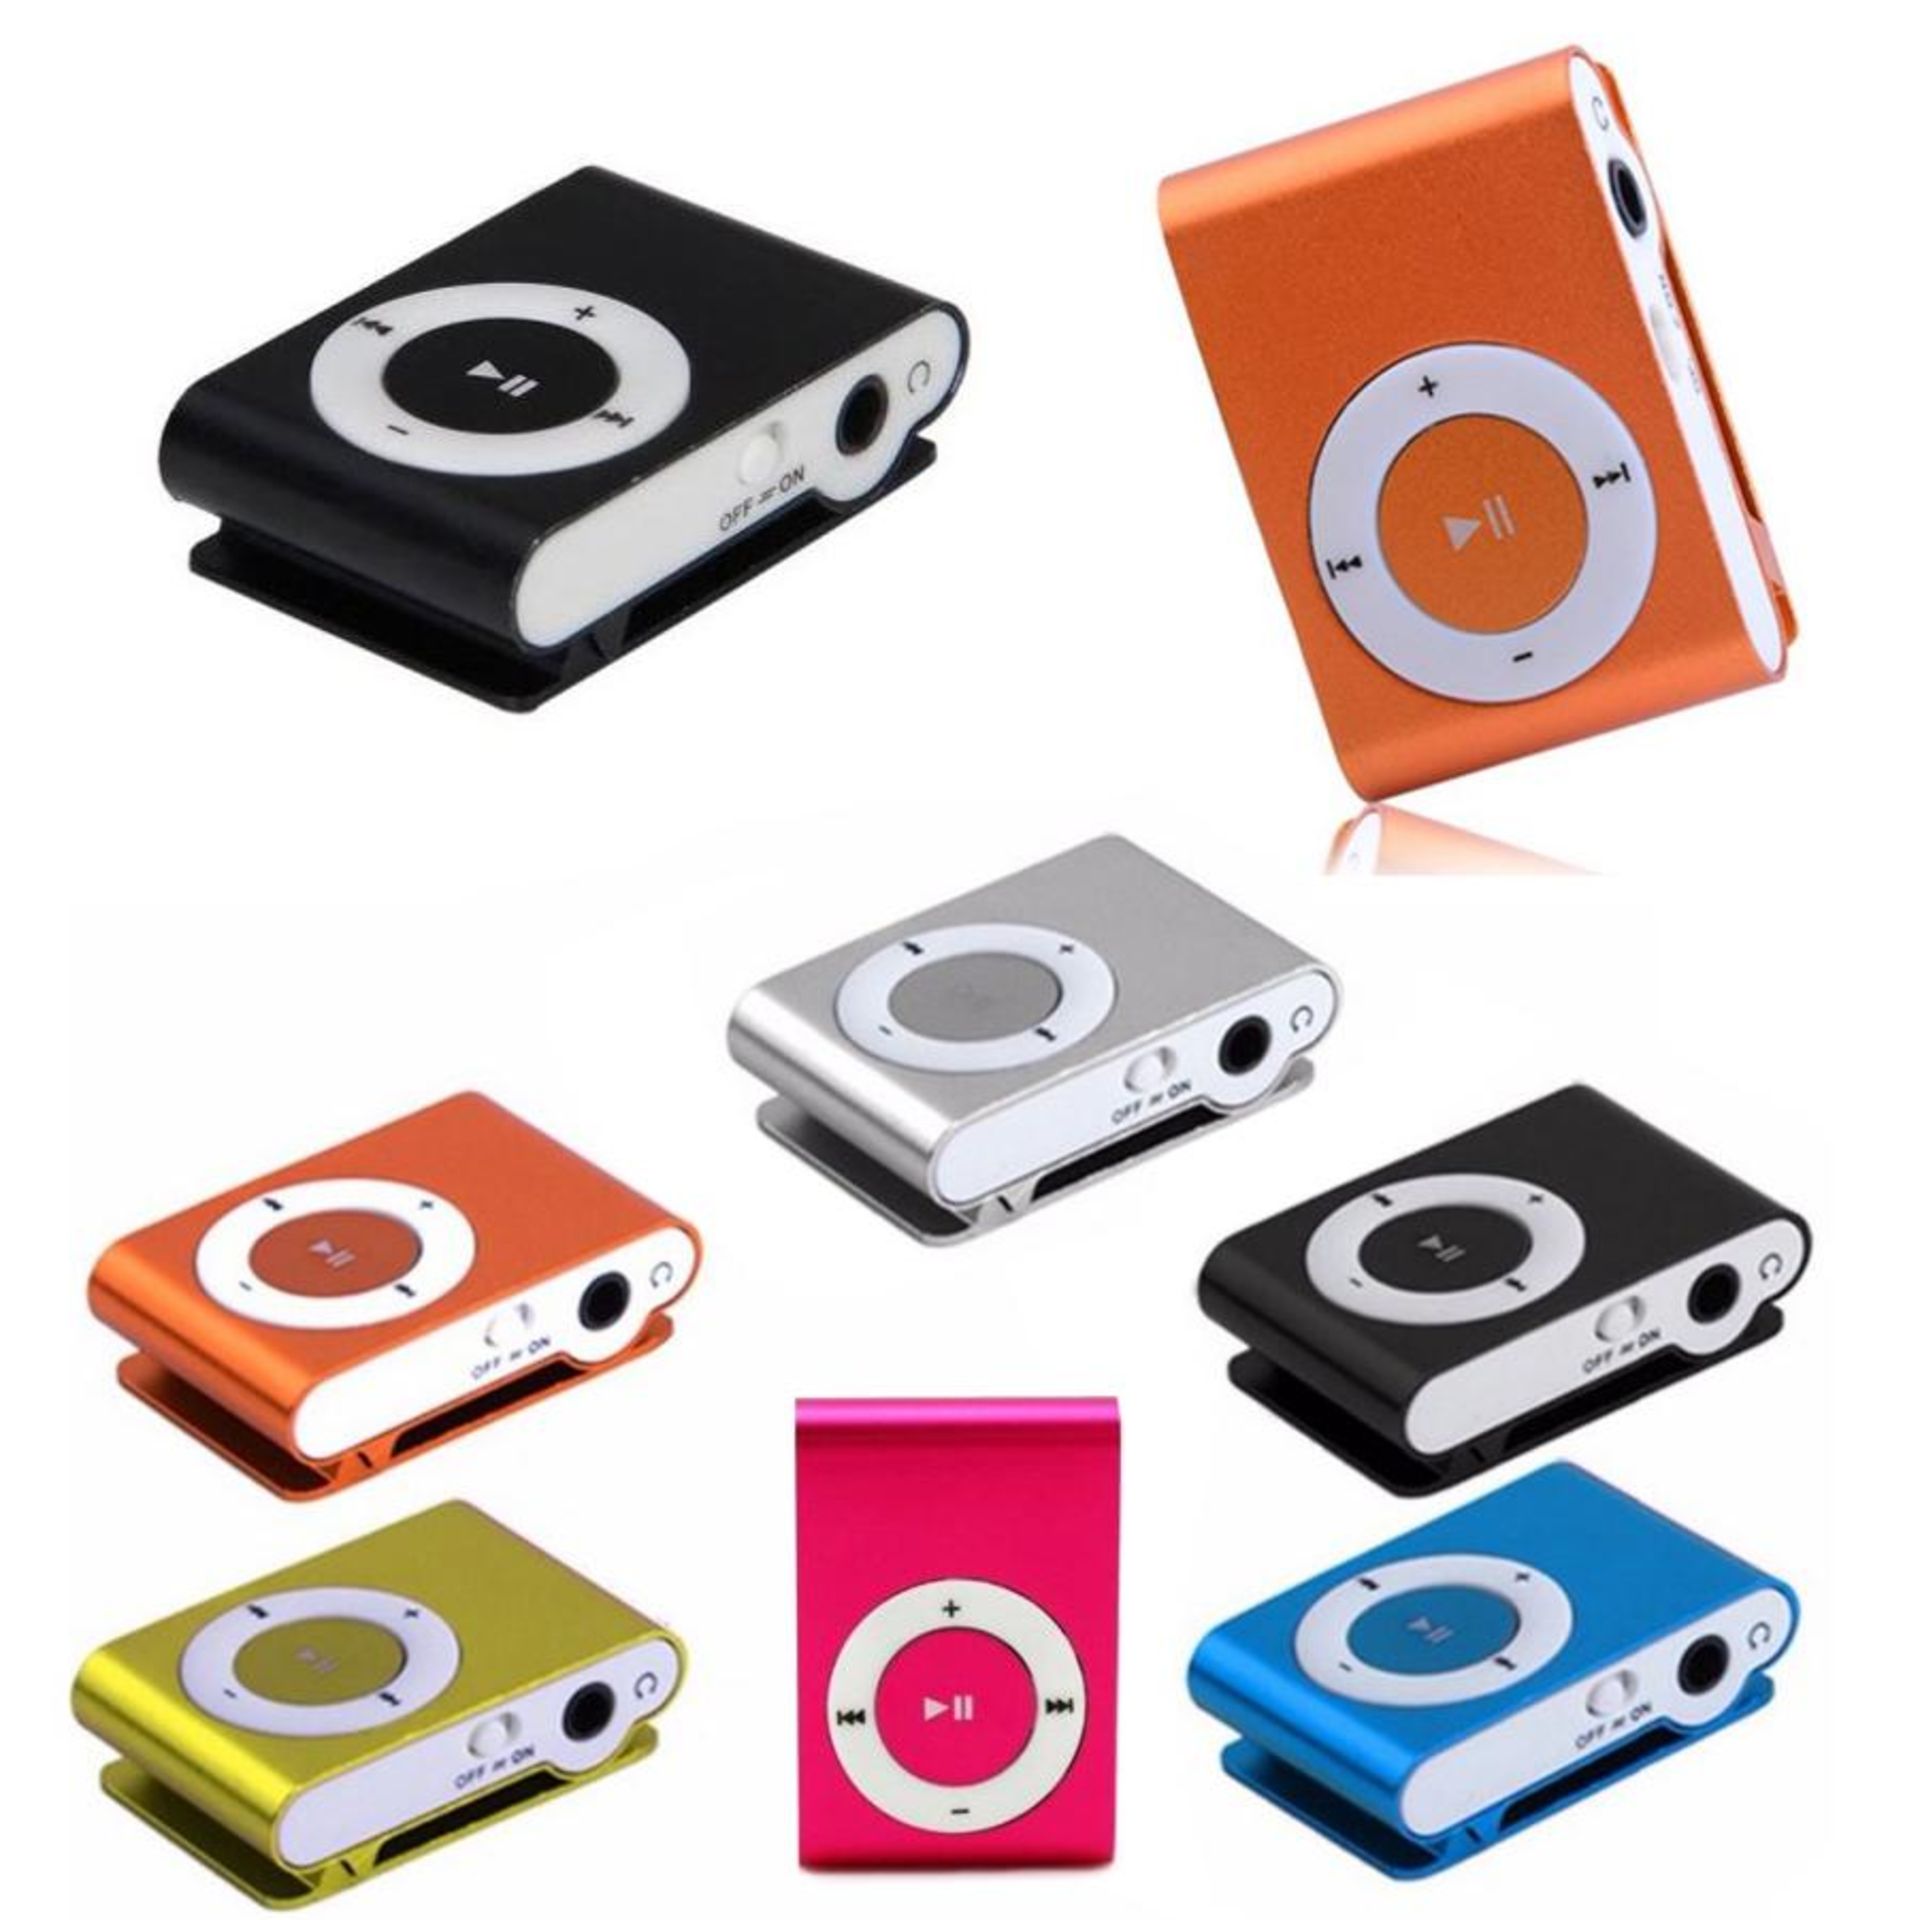 No VAT Brand New Mini Clip Digital USB MP3 Player With SD Card Slot - Ideal For Sports/Outdoor - Image 2 of 2